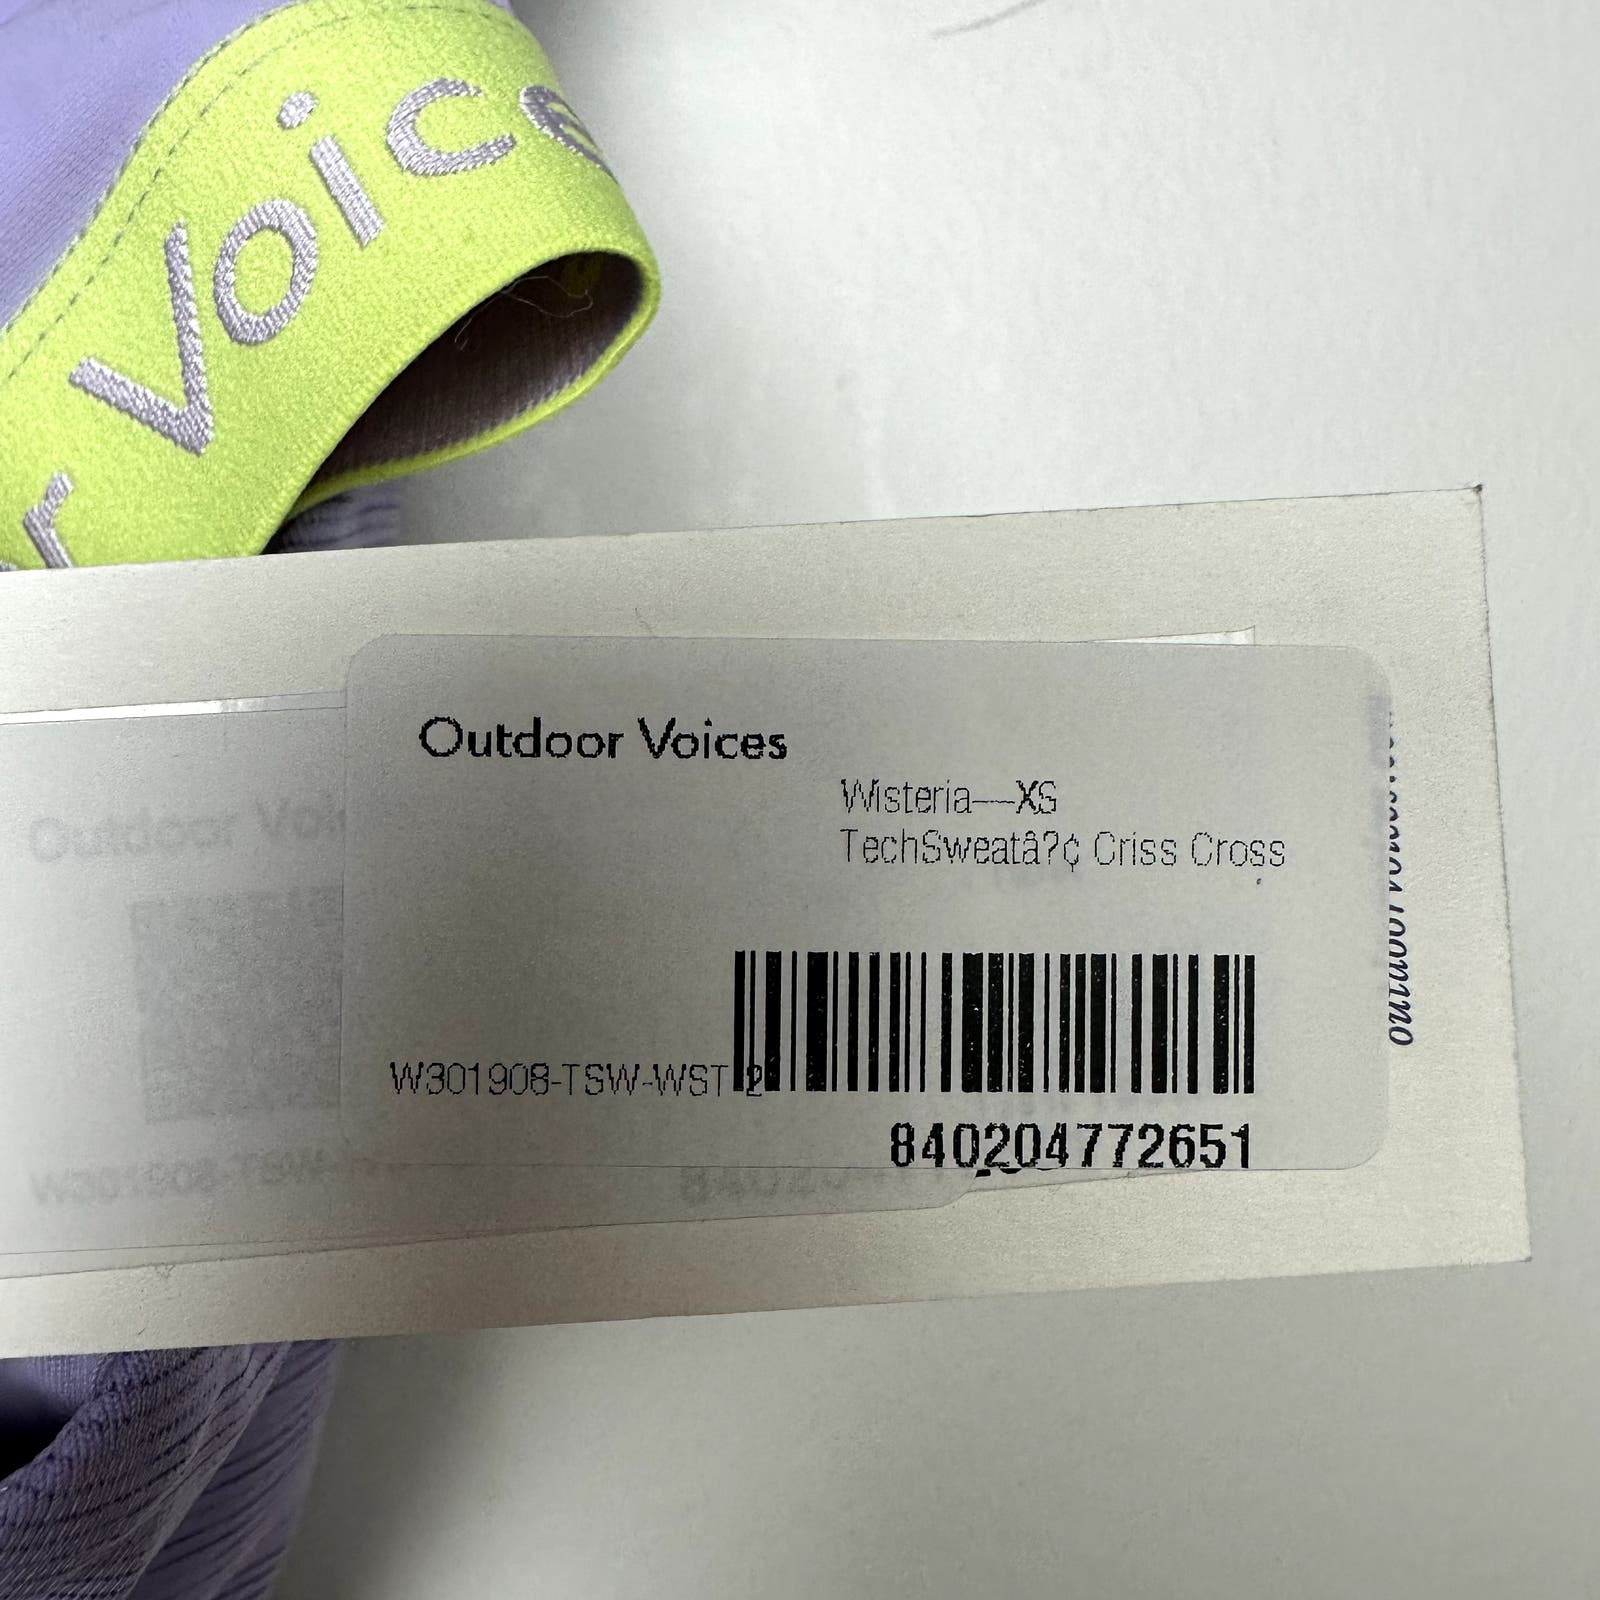 Outdoor Voices NWT Tech Sweat Criss Cross Wisteria Purple Size XS